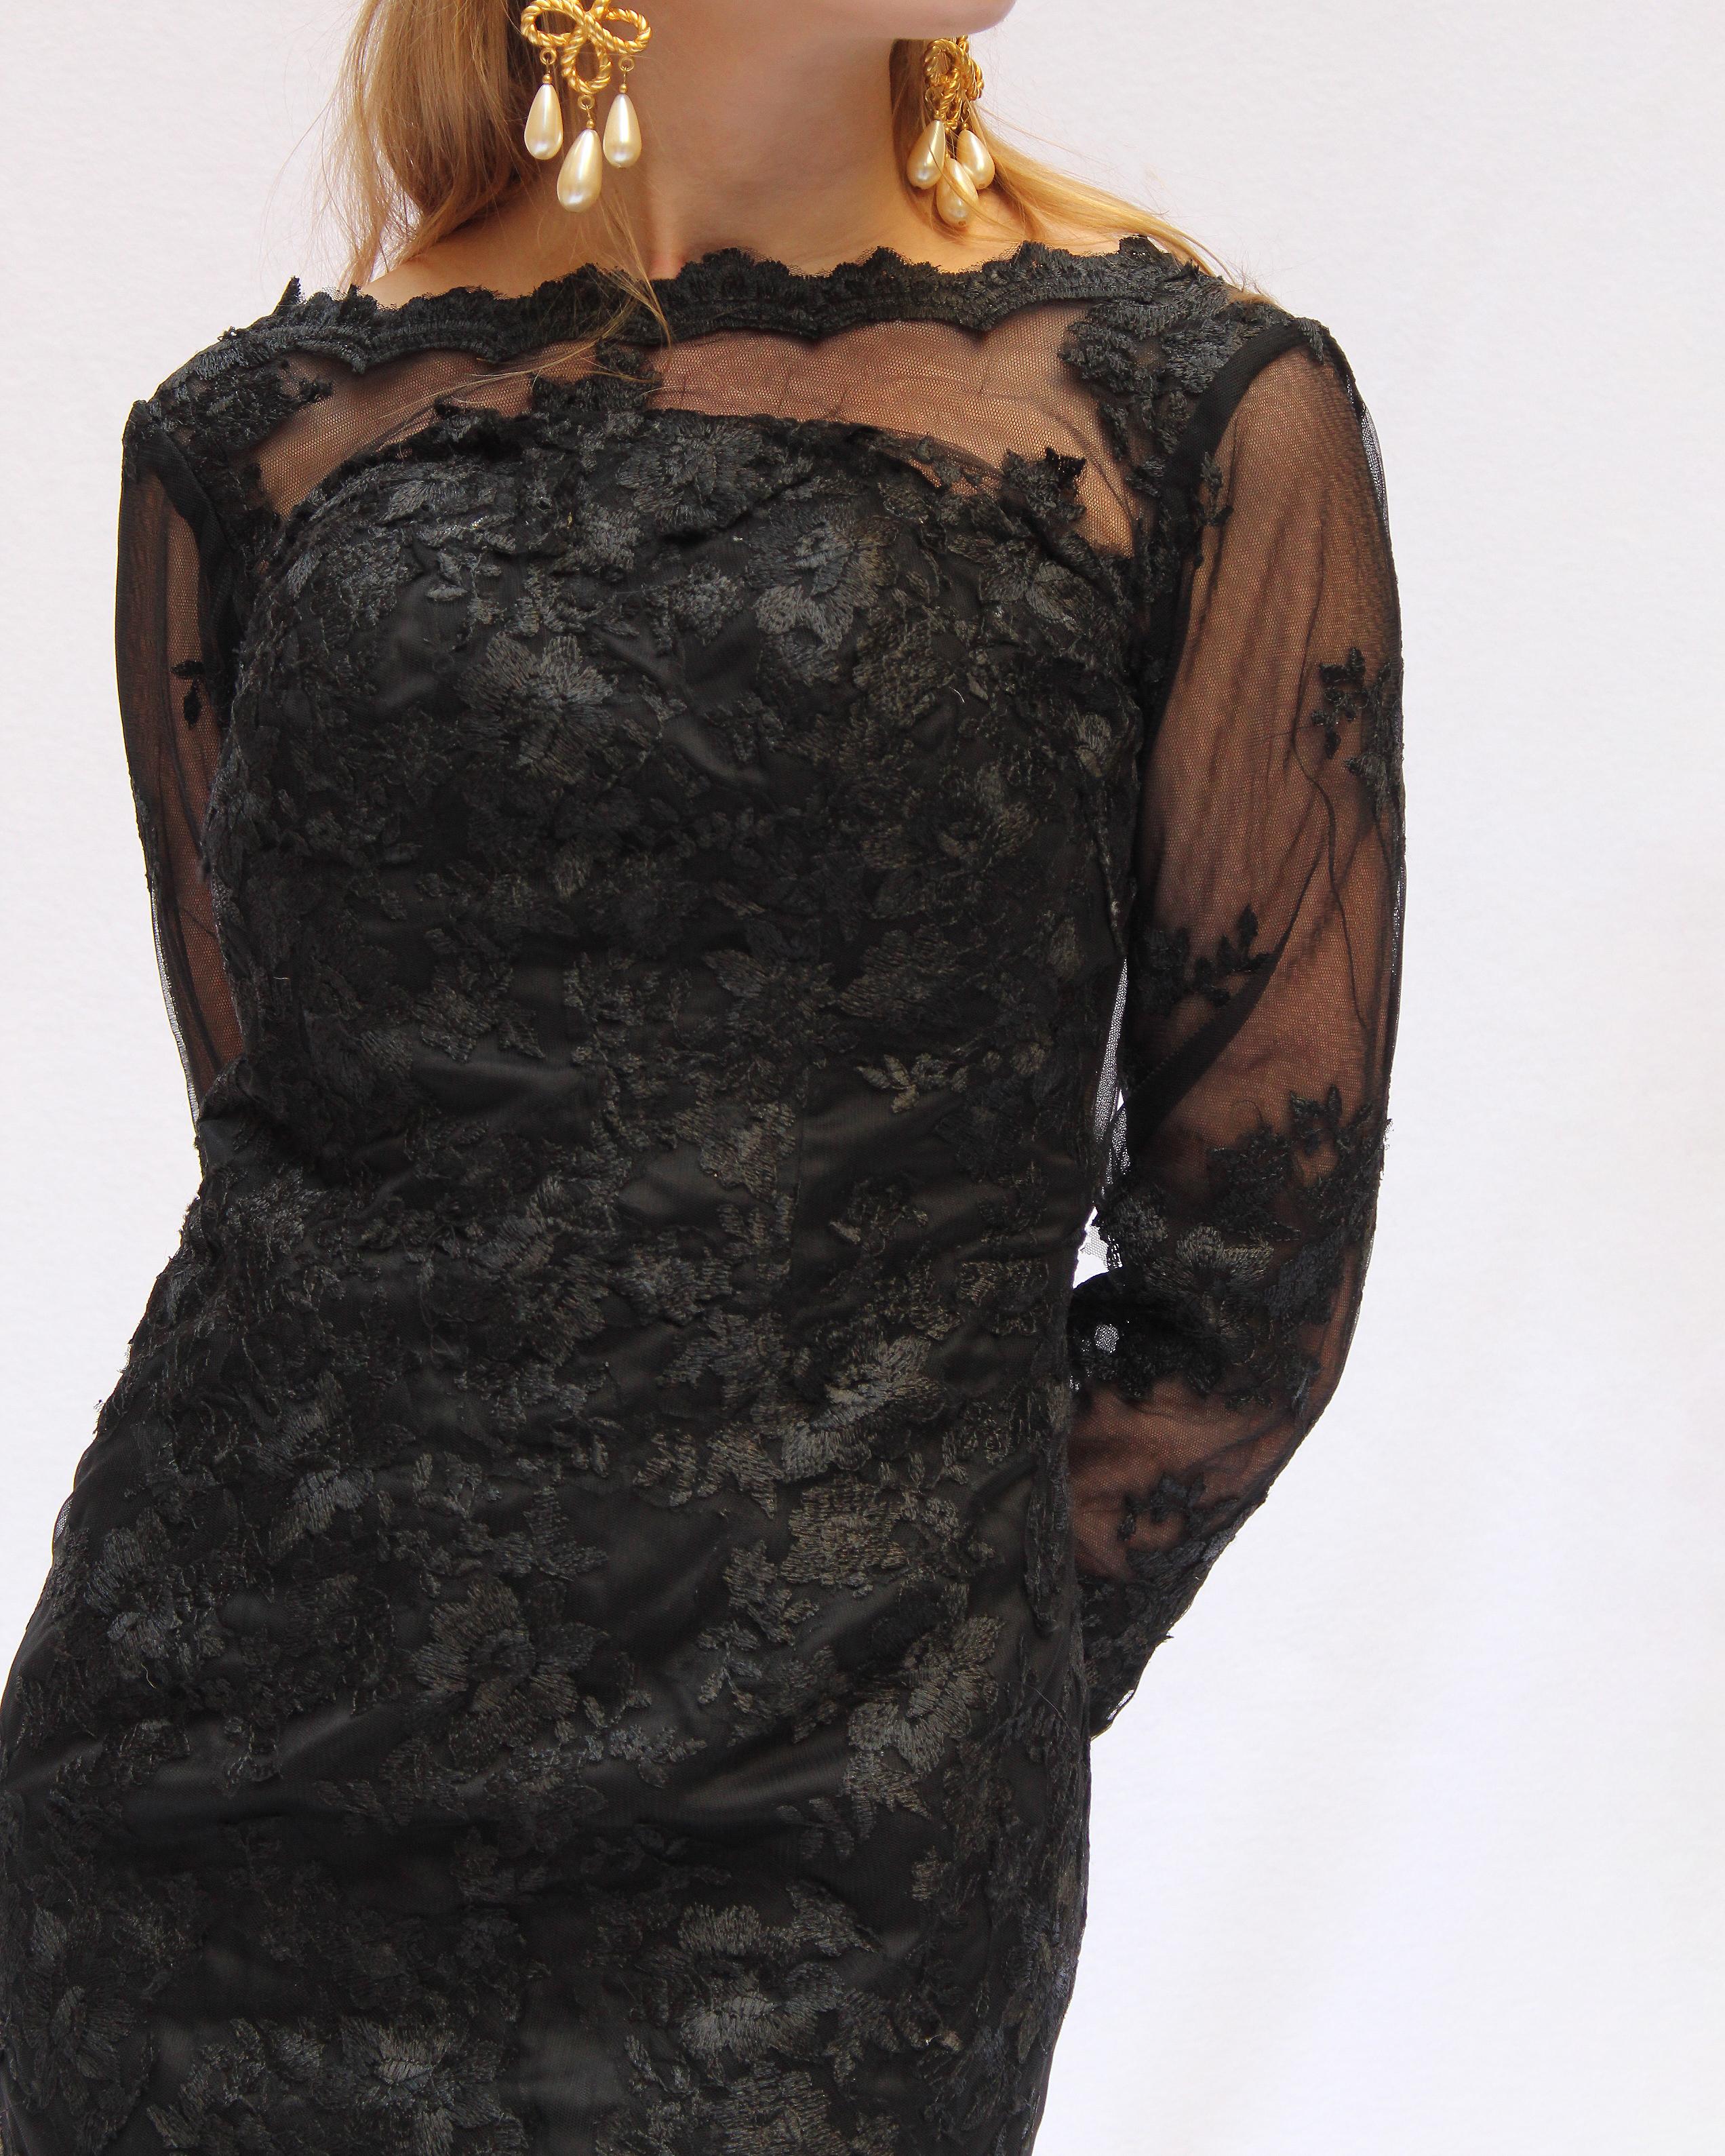 Men's Vintage Black Lace Gown, in the style of Dolce & Gabbana For Sale